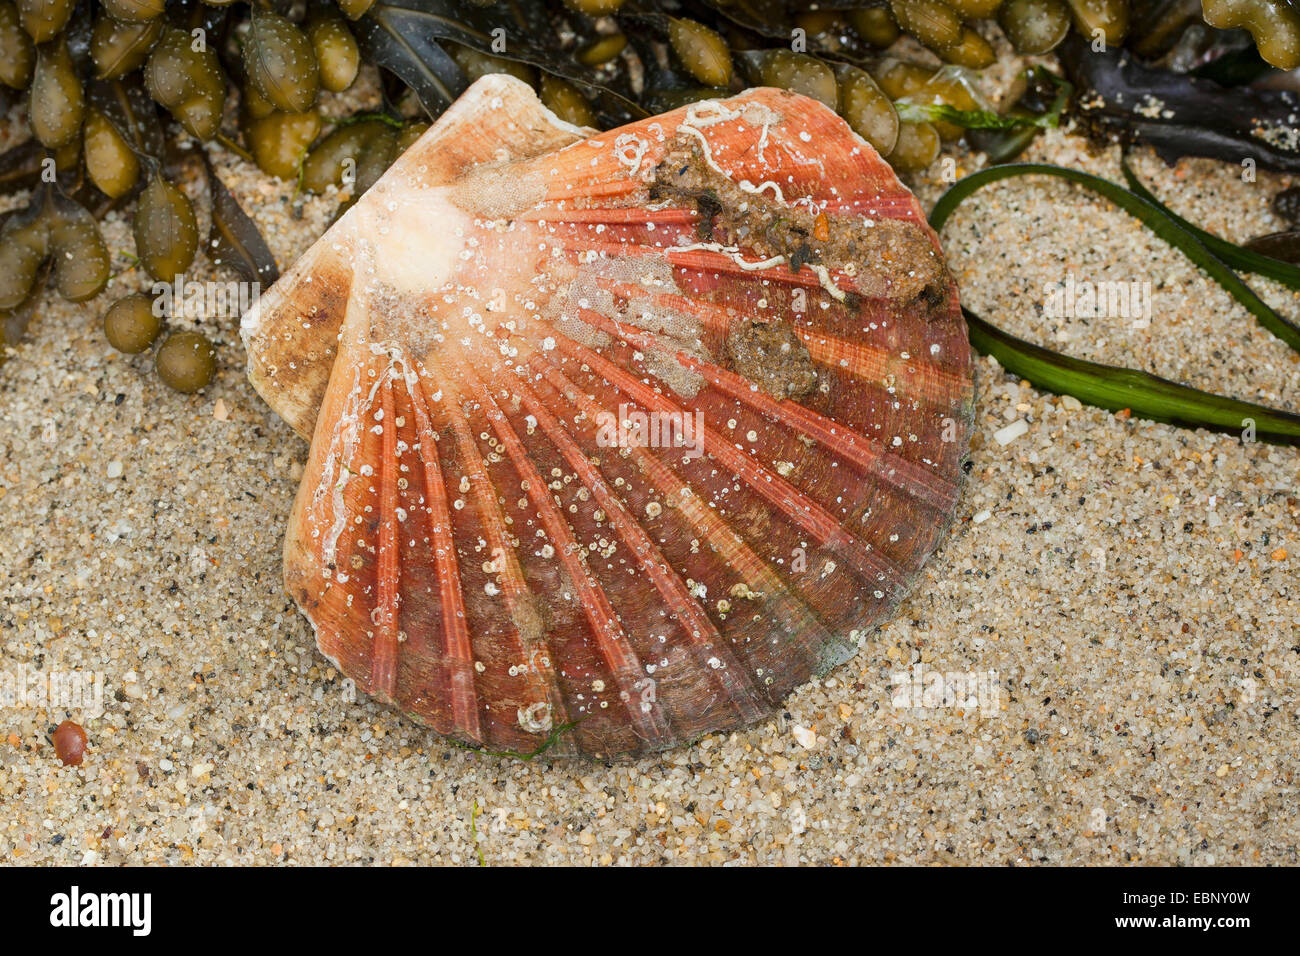 Great scallop, Common scallop, Coquille St. Jacques (Pecten maximus), with seaweed on the beach Stock Photo